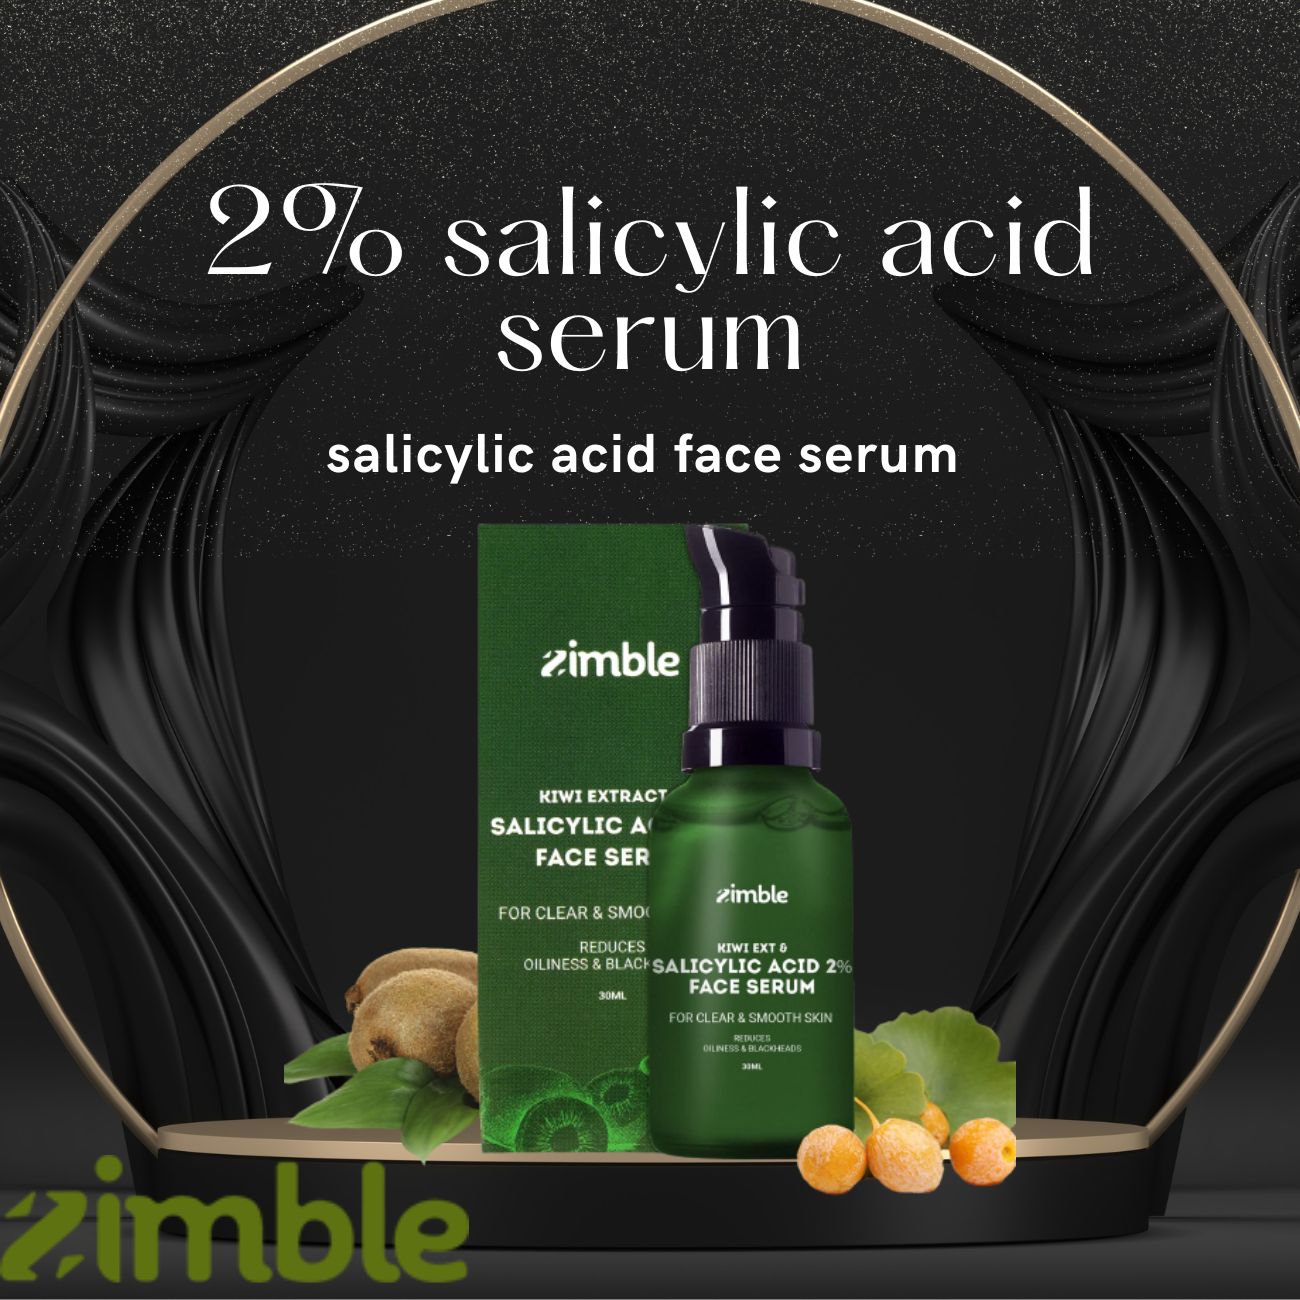 Does Salicylic Acid Face Serum remove Acne Aging Skin?